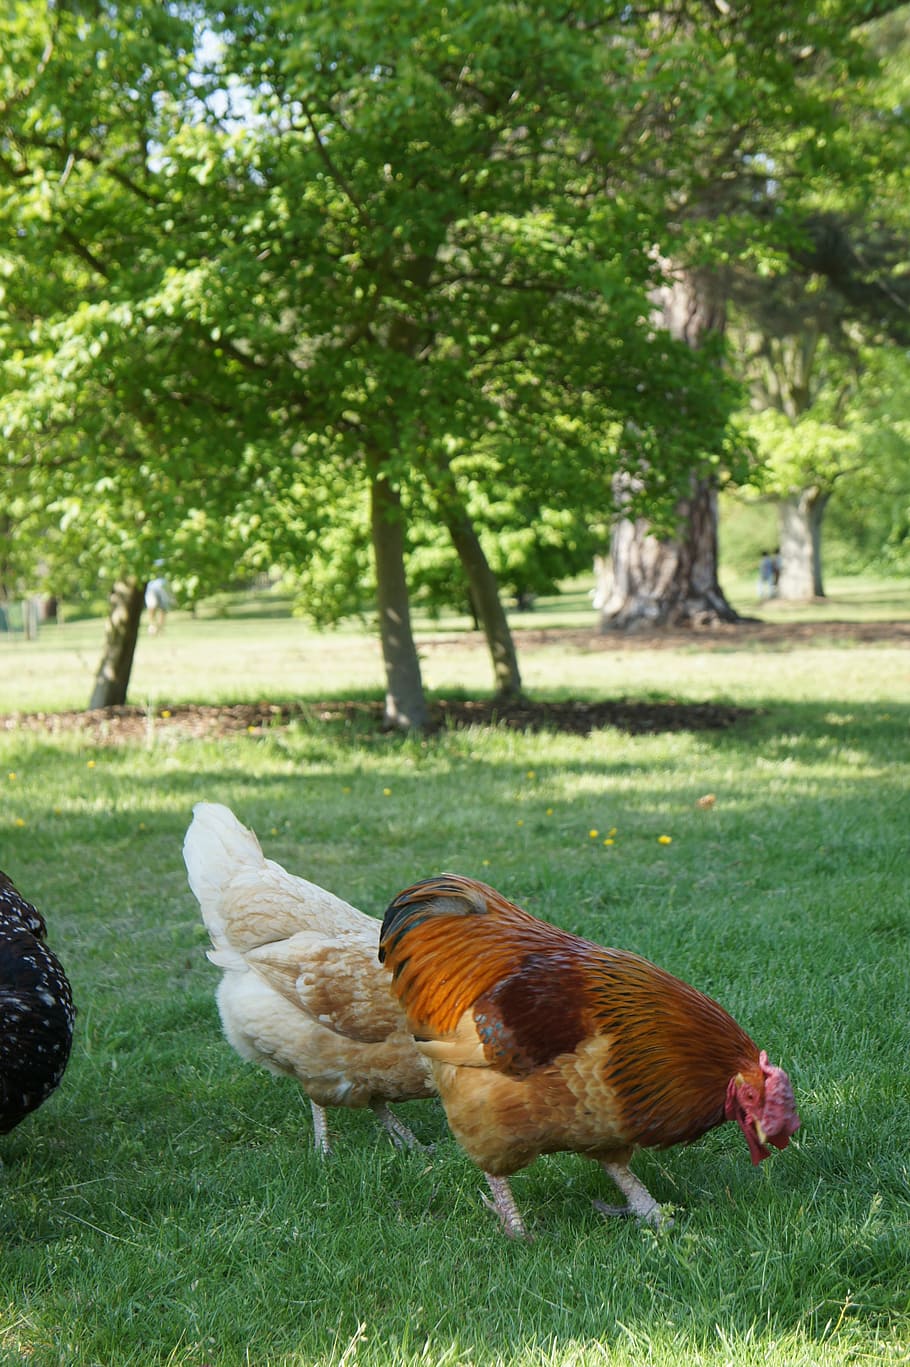 chicken, hen, poultry, farm, bird, animal, agriculture, food